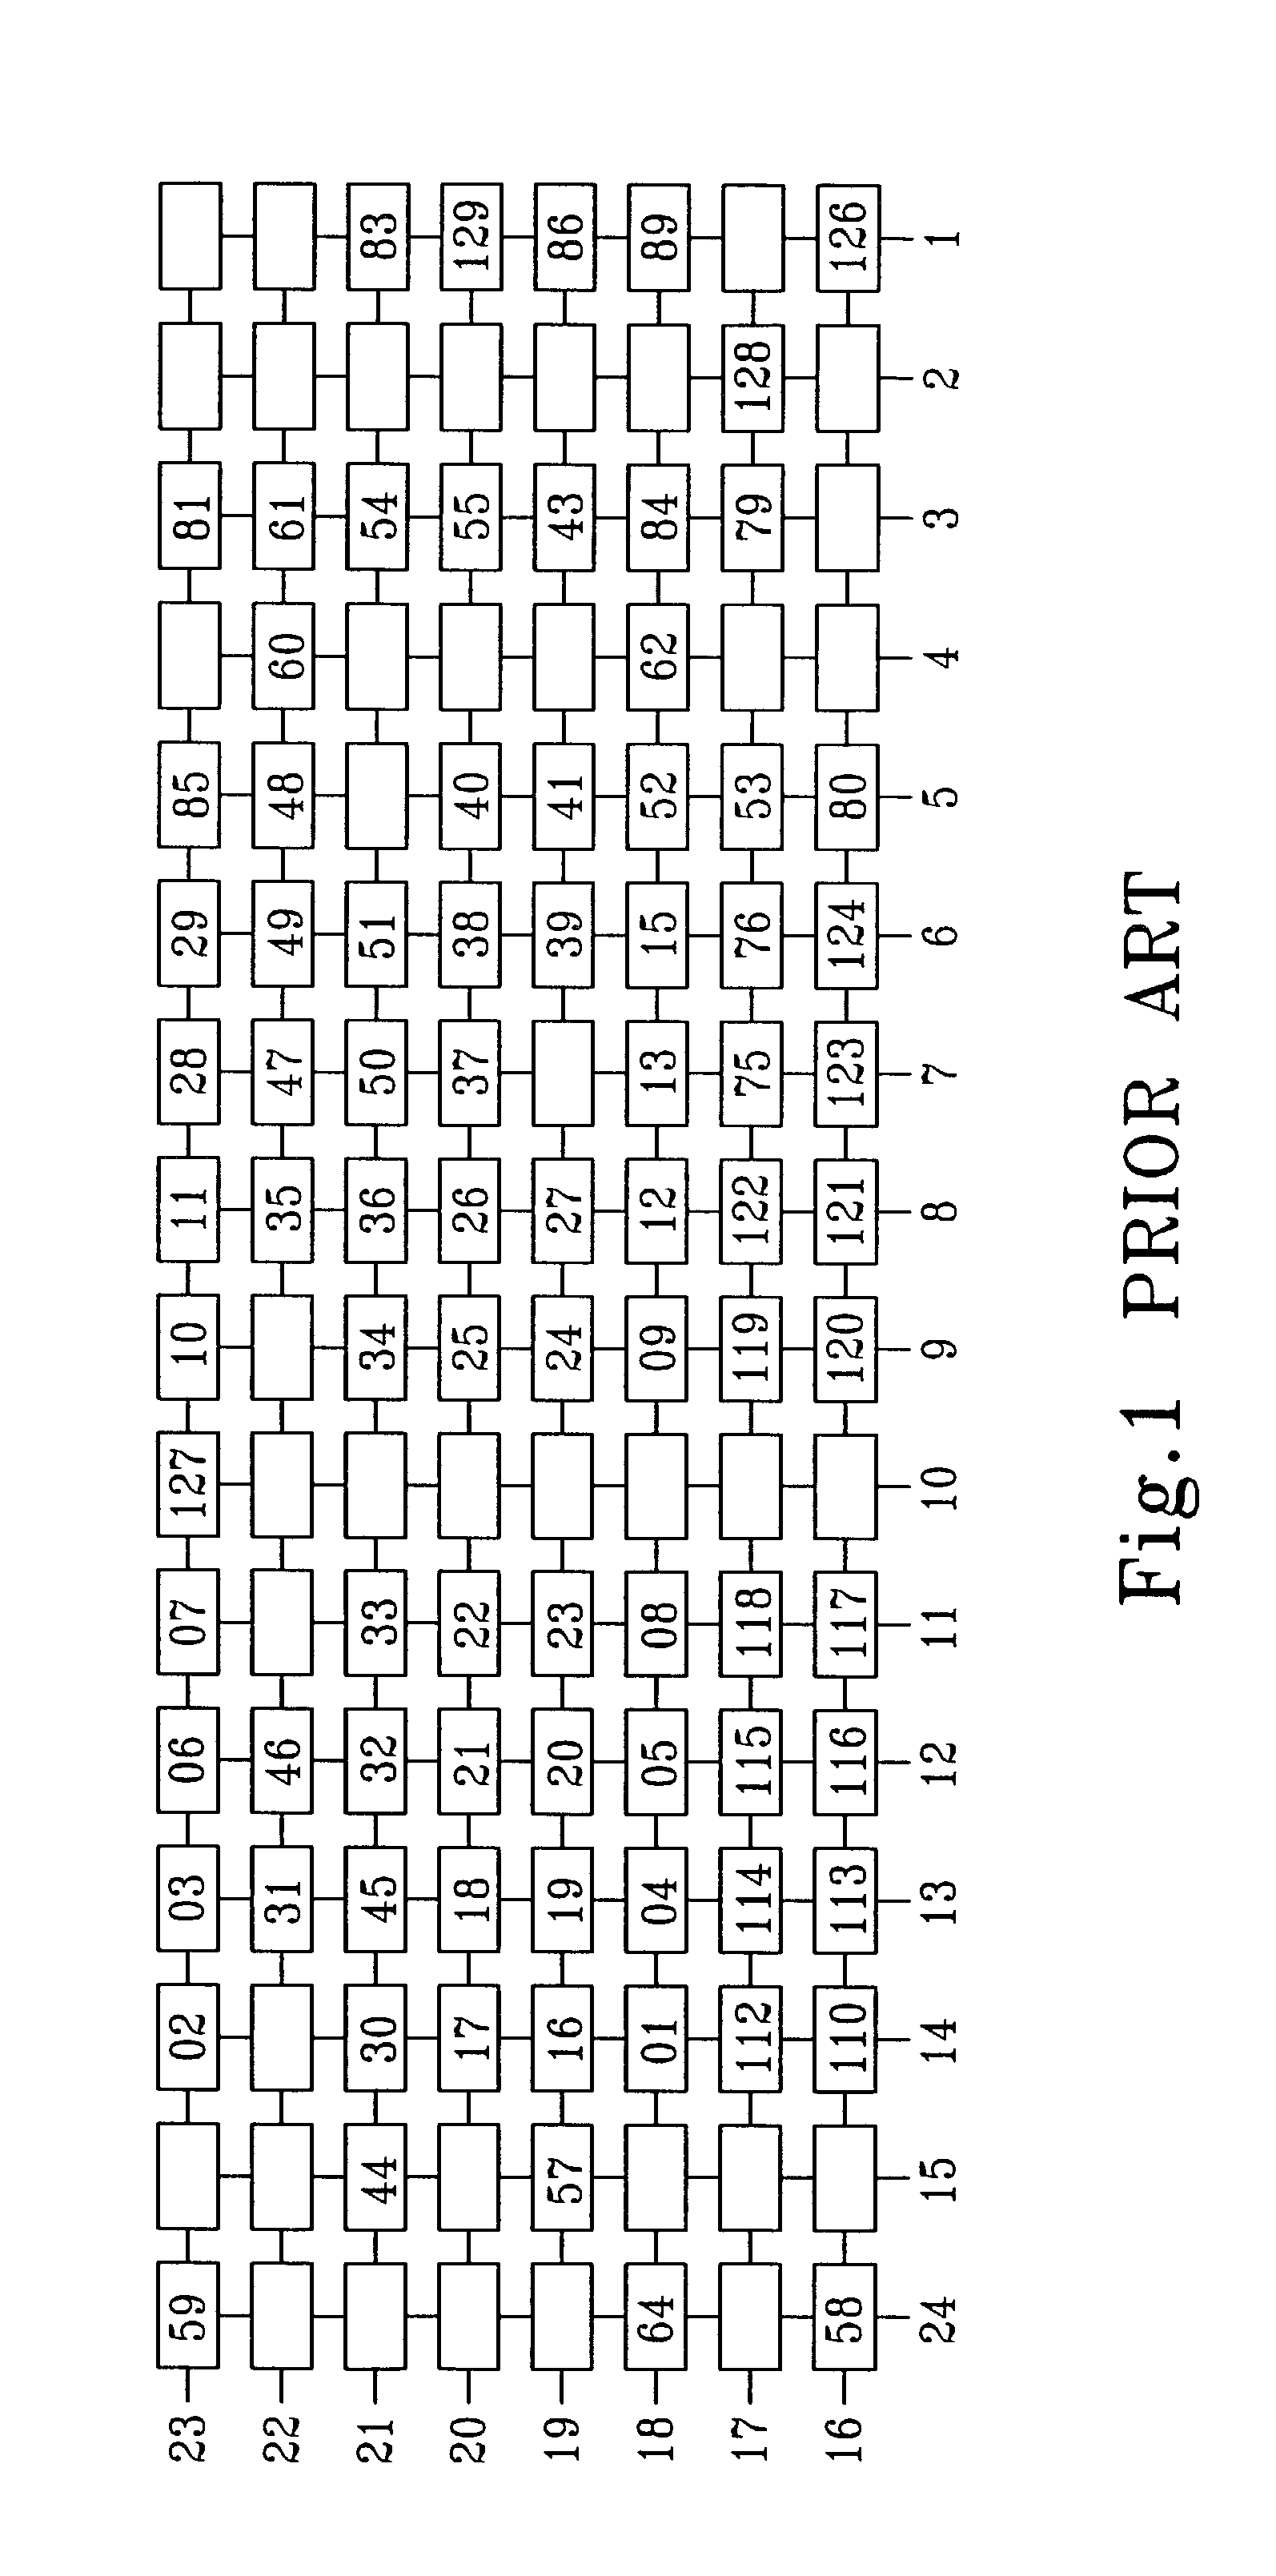 Method for configuring button keys on a membrane